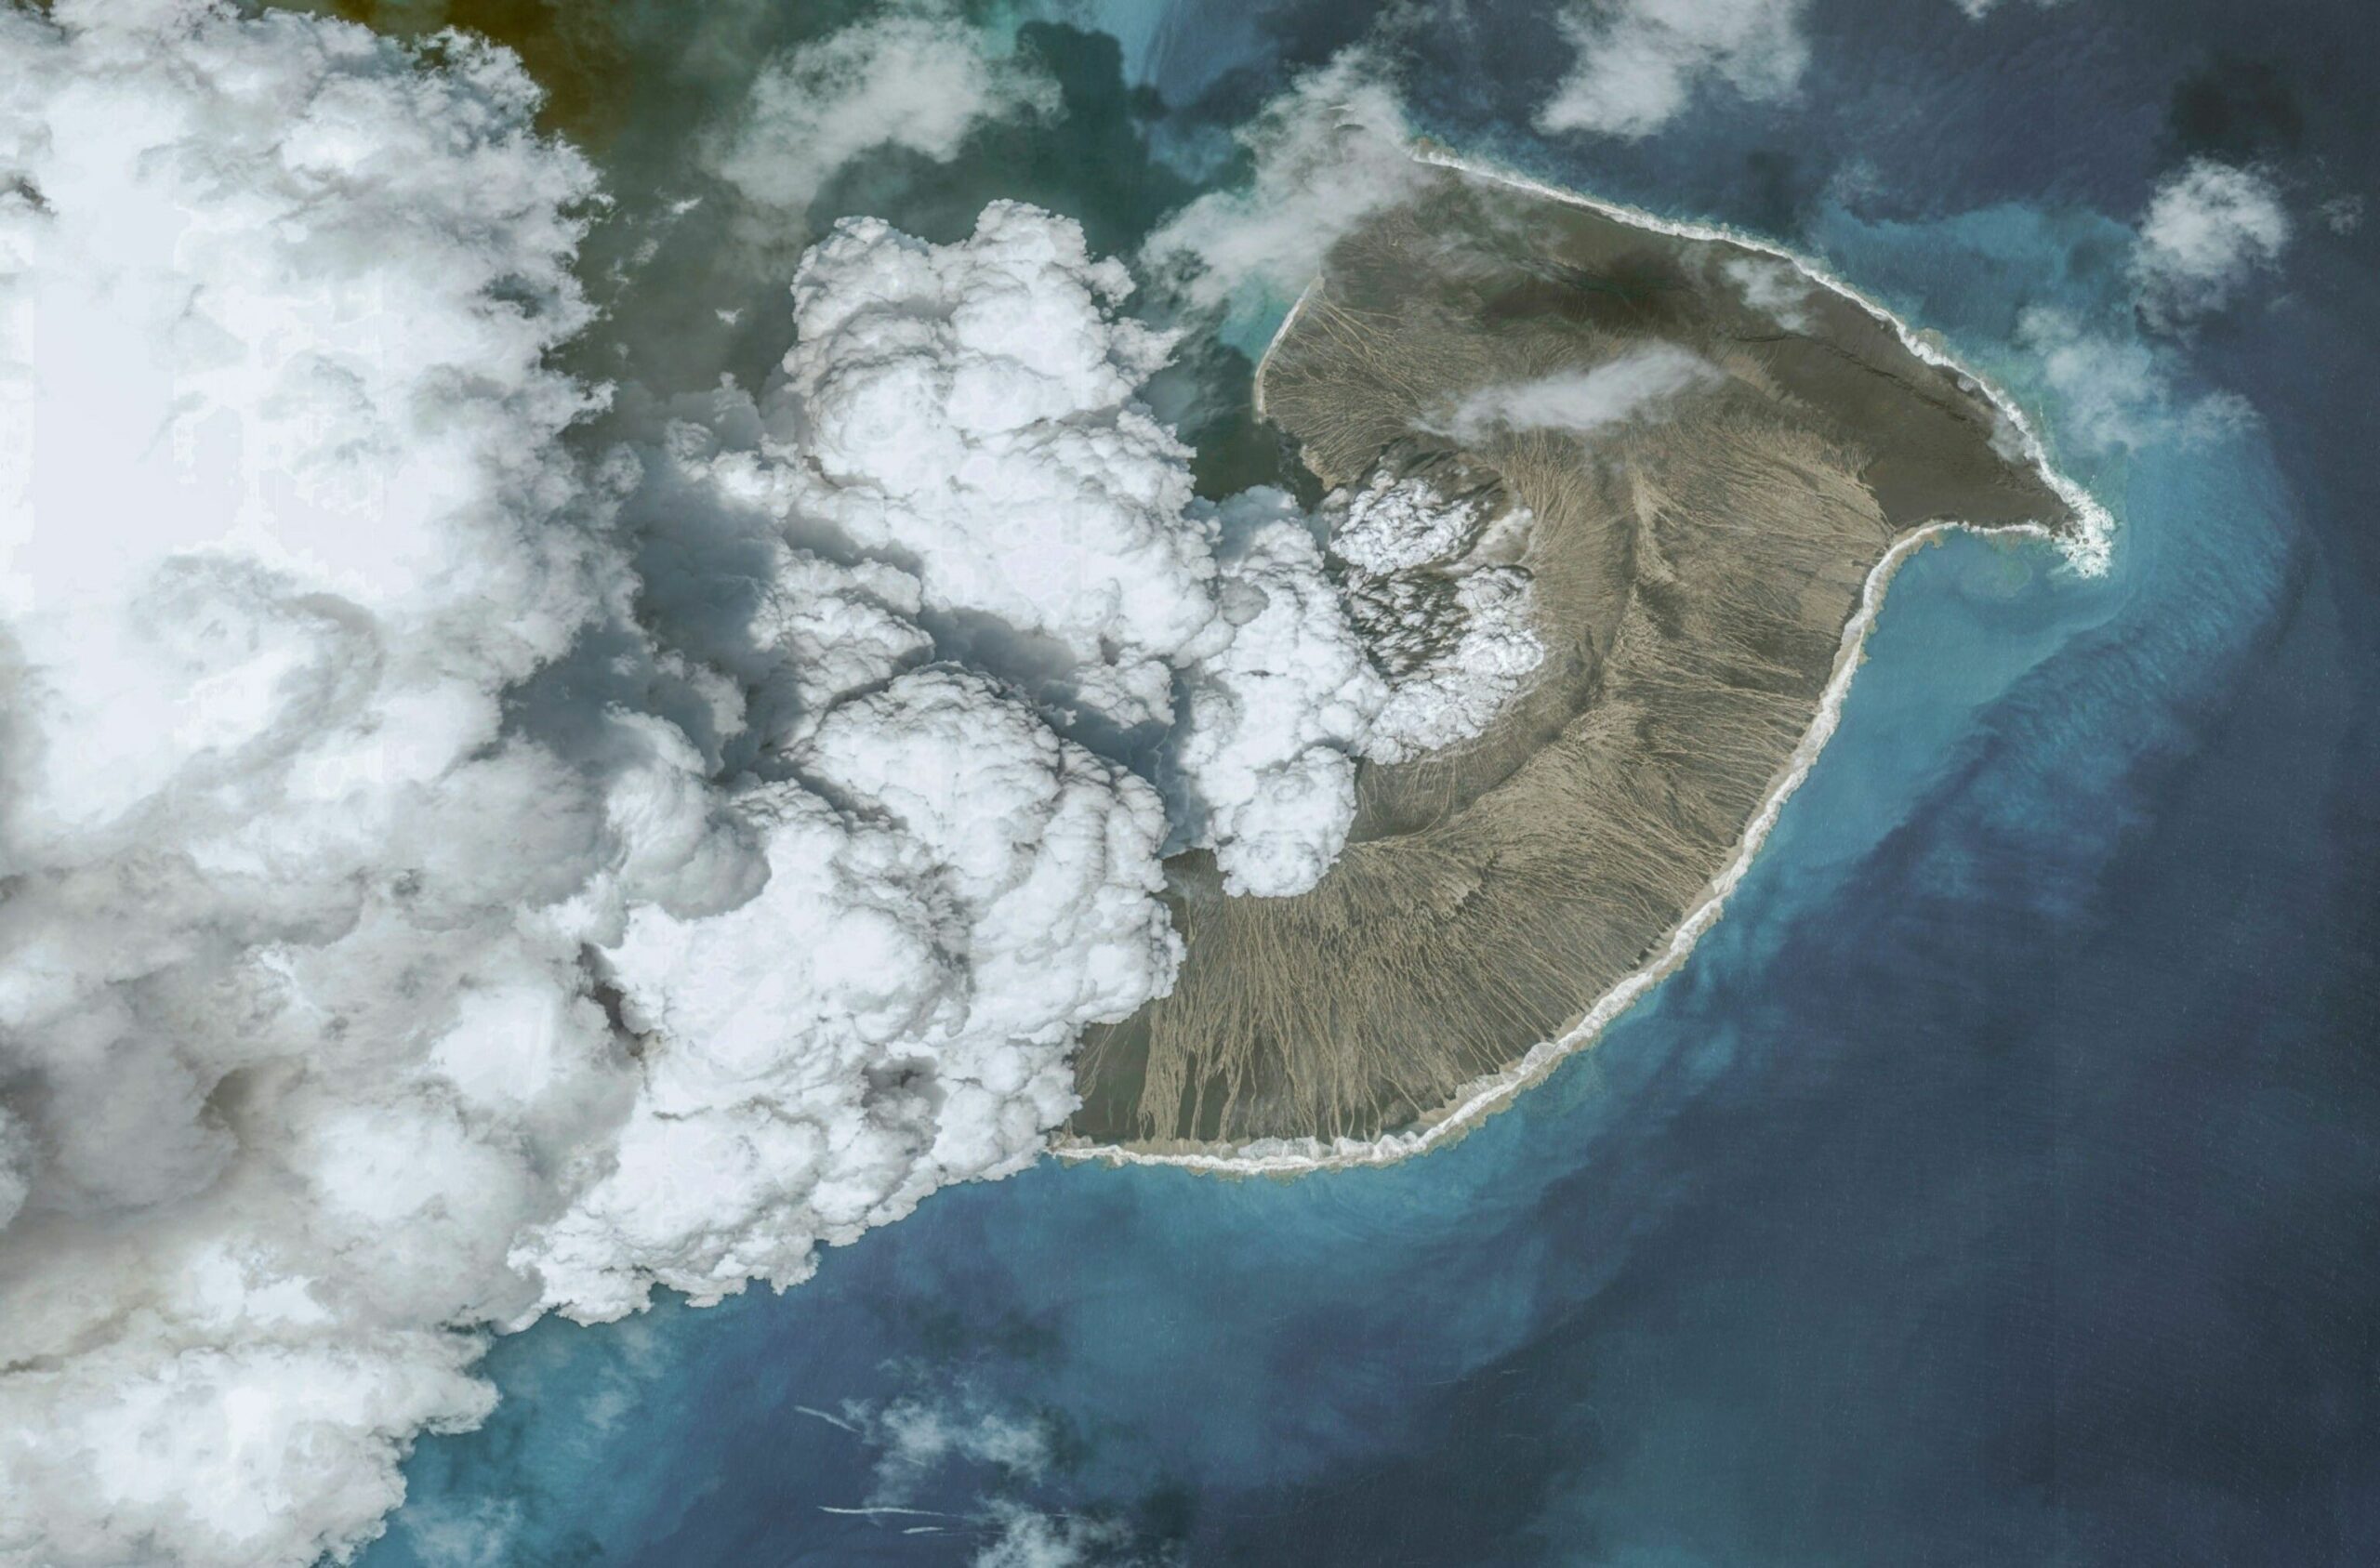 The volcanic eruption in Tonga was of an even greater magnitude than previously understood.